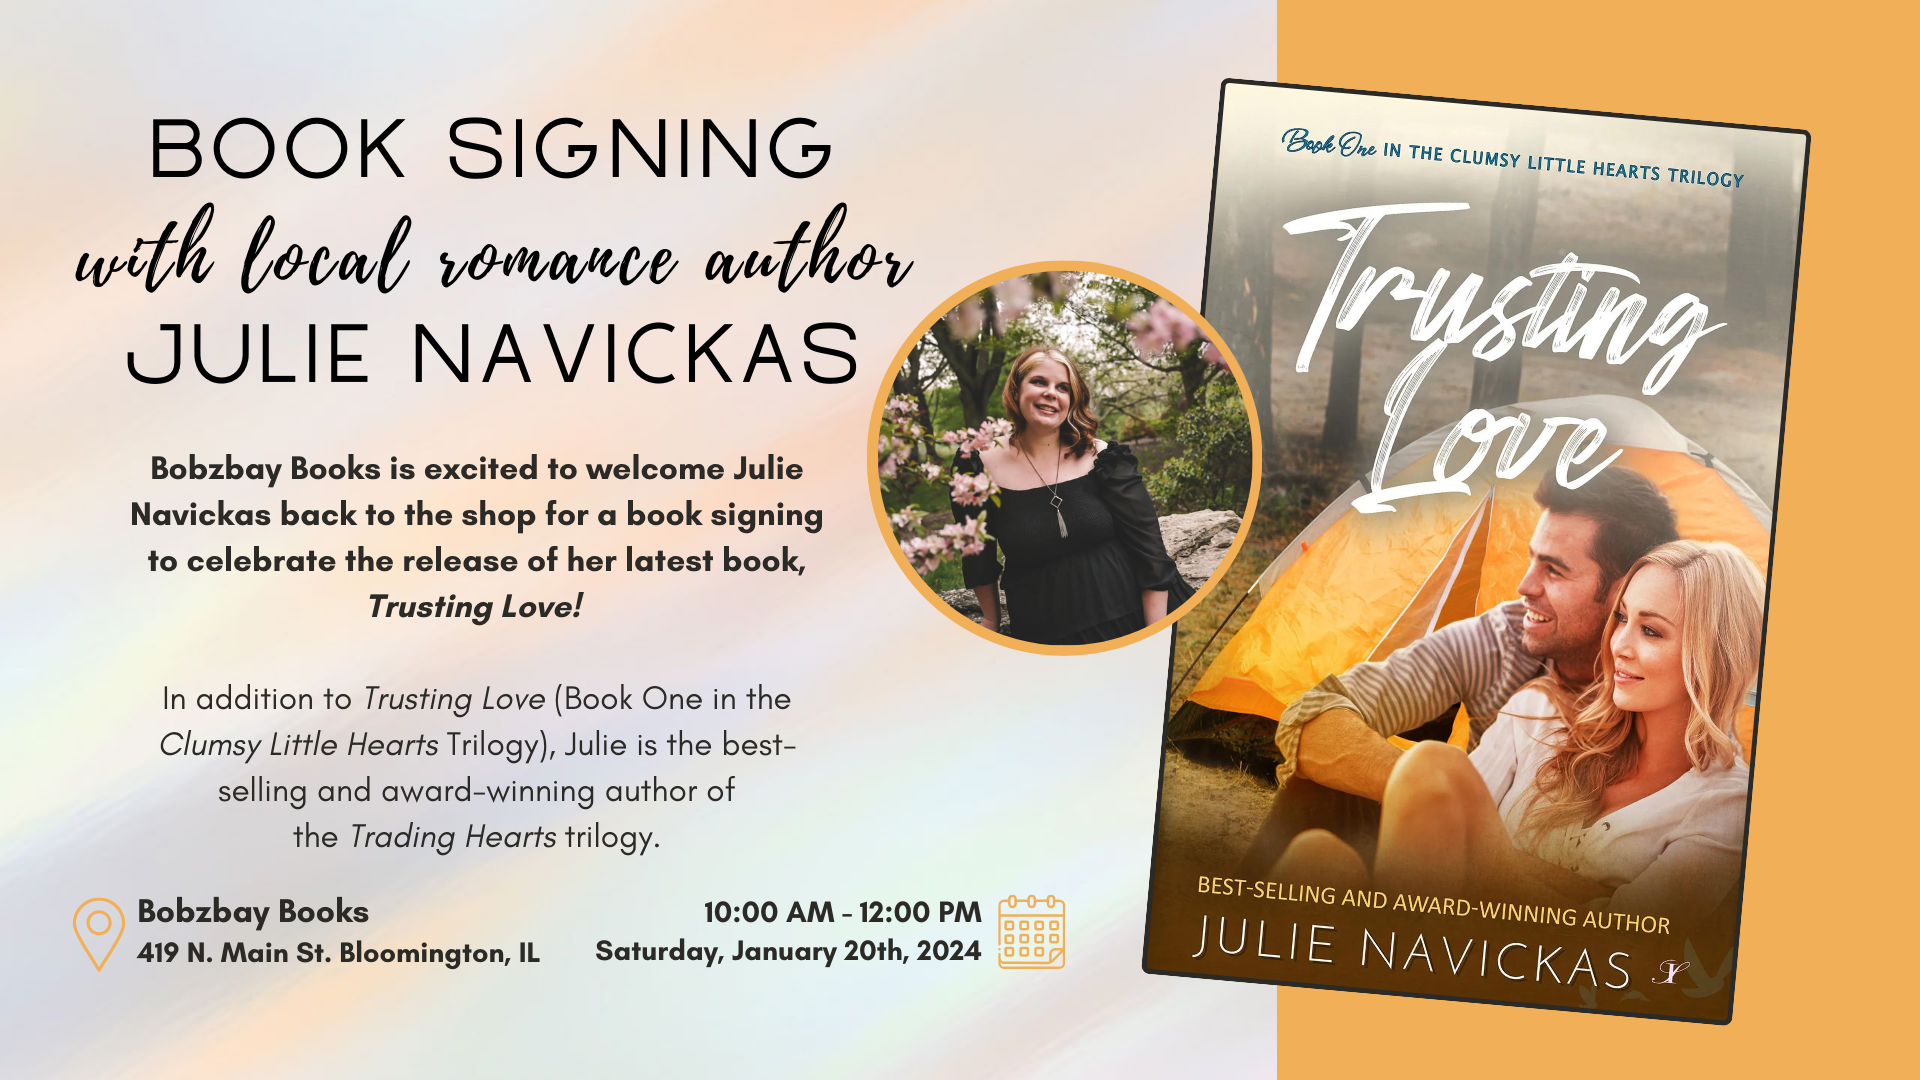 Book Signing with Local Romance Author Julie Navickas